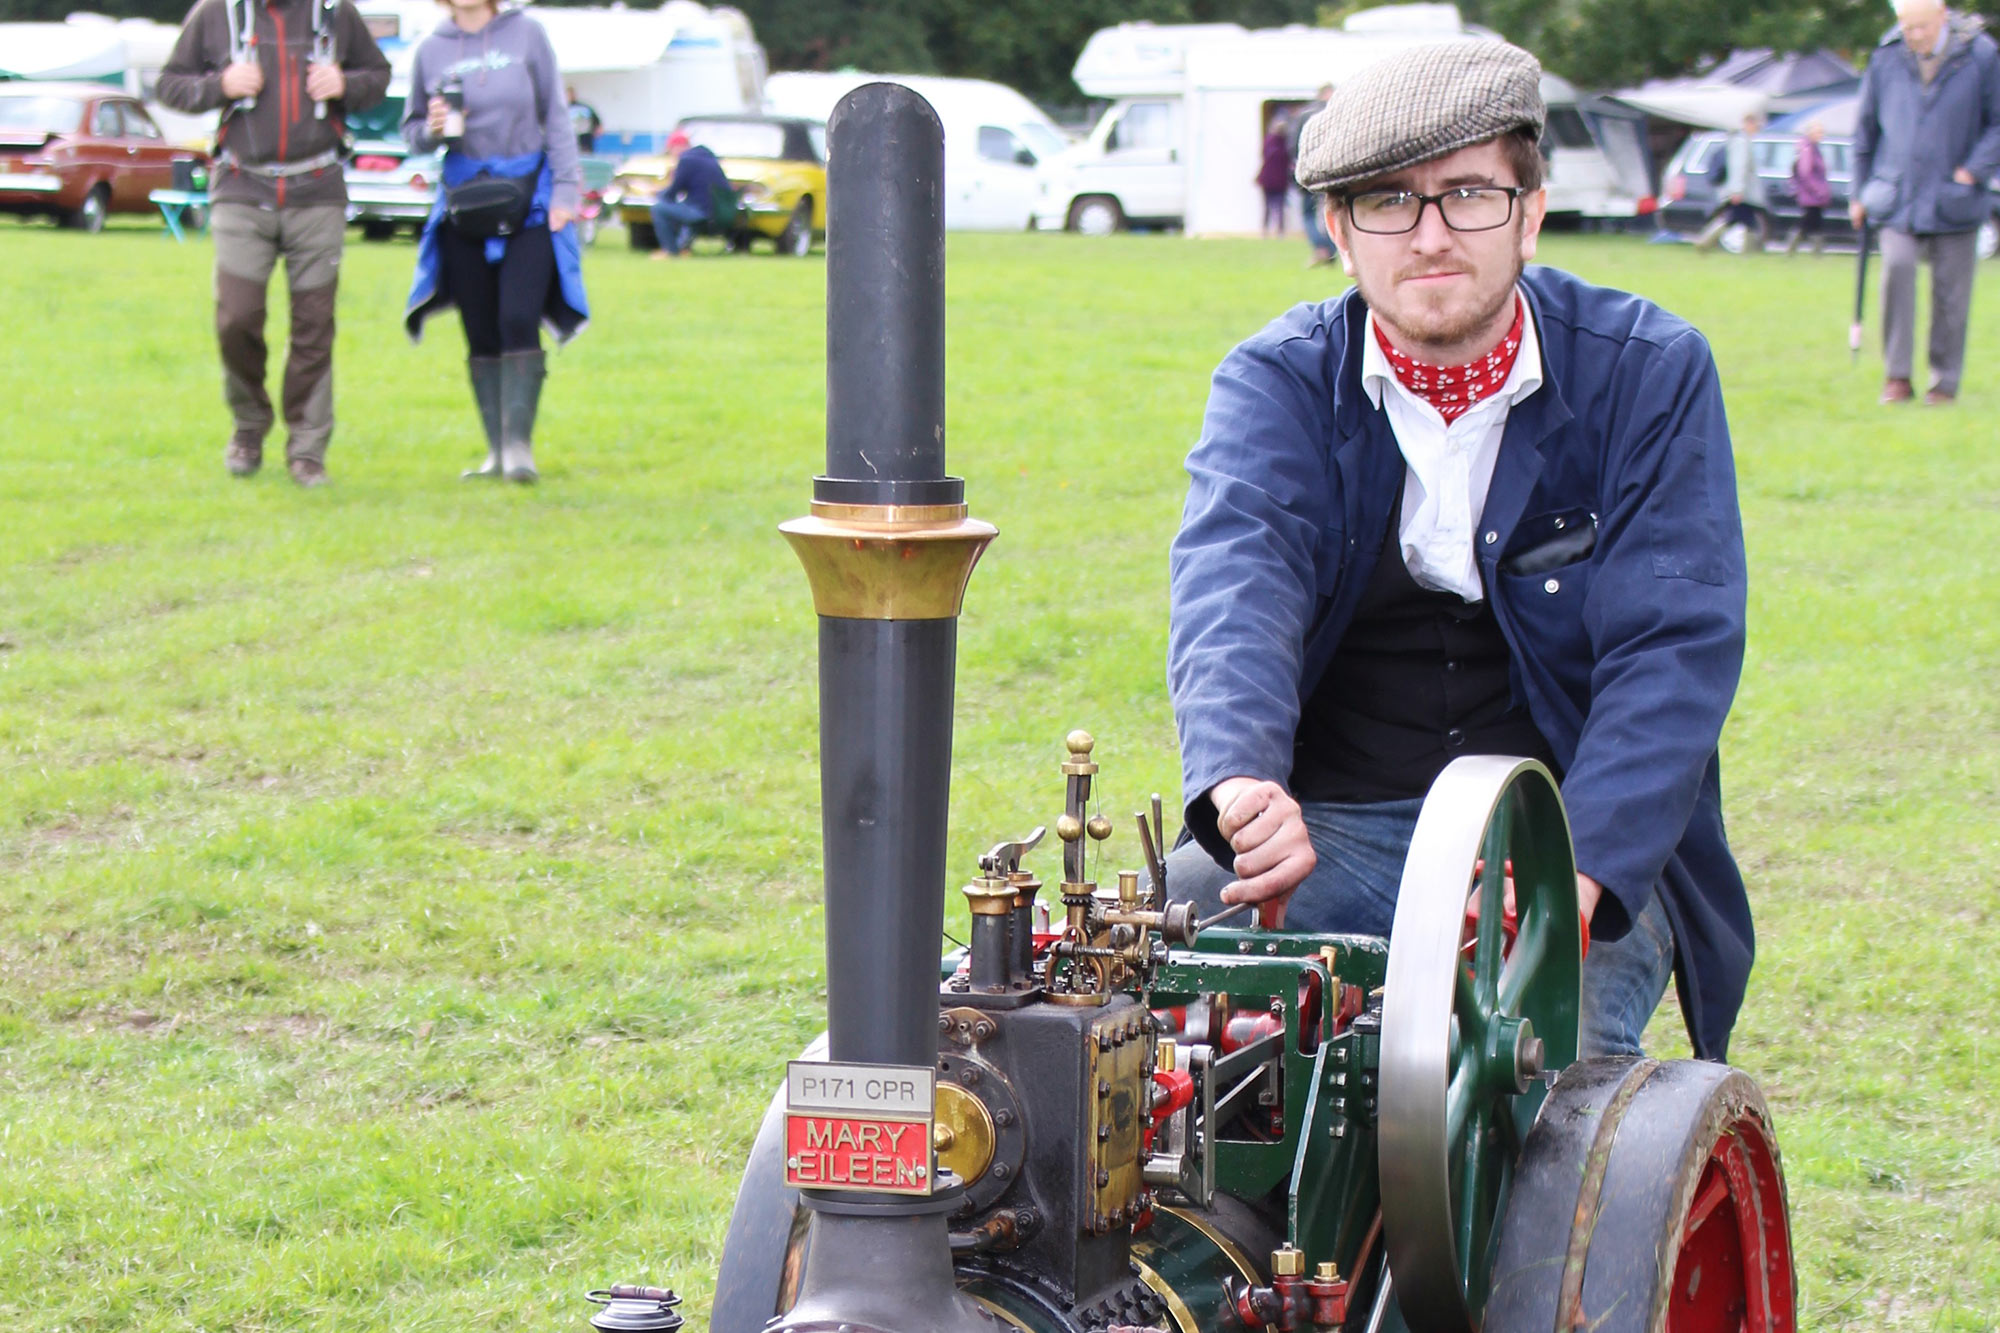 Miniature steam engine at Burley charity show